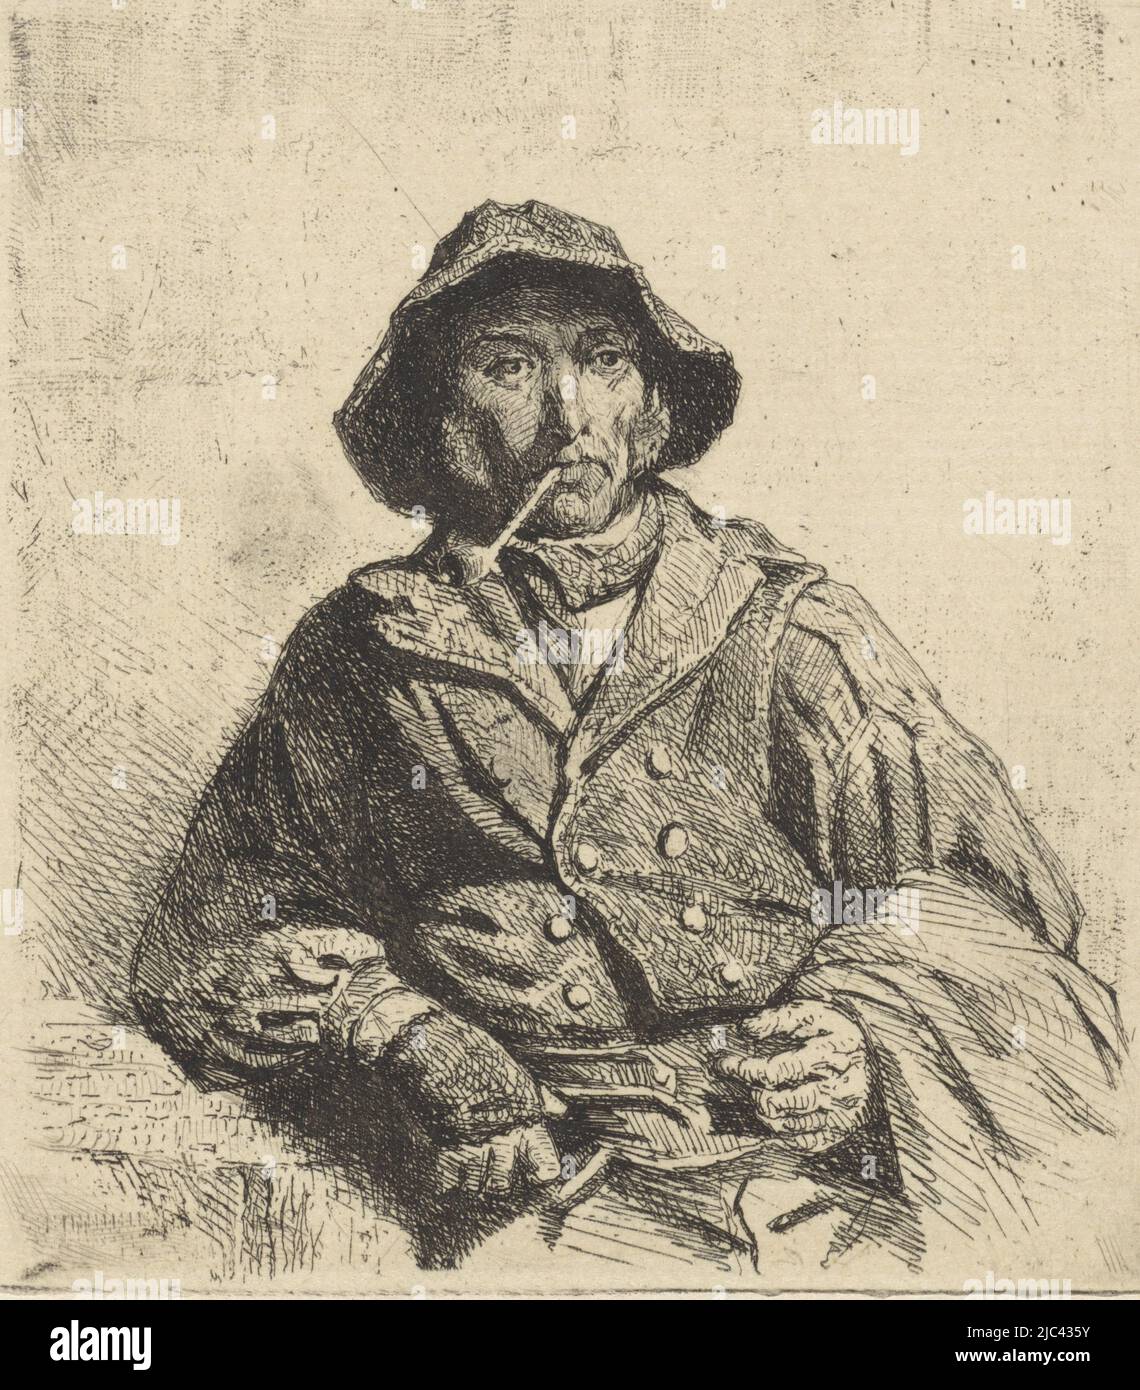 Sailor with a sou'wester and a pipe, print maker: Hendrik Jacobus Scholten, 1836 - 1907, paper, etching, h 98 mm × w 93 mm Stock Photo